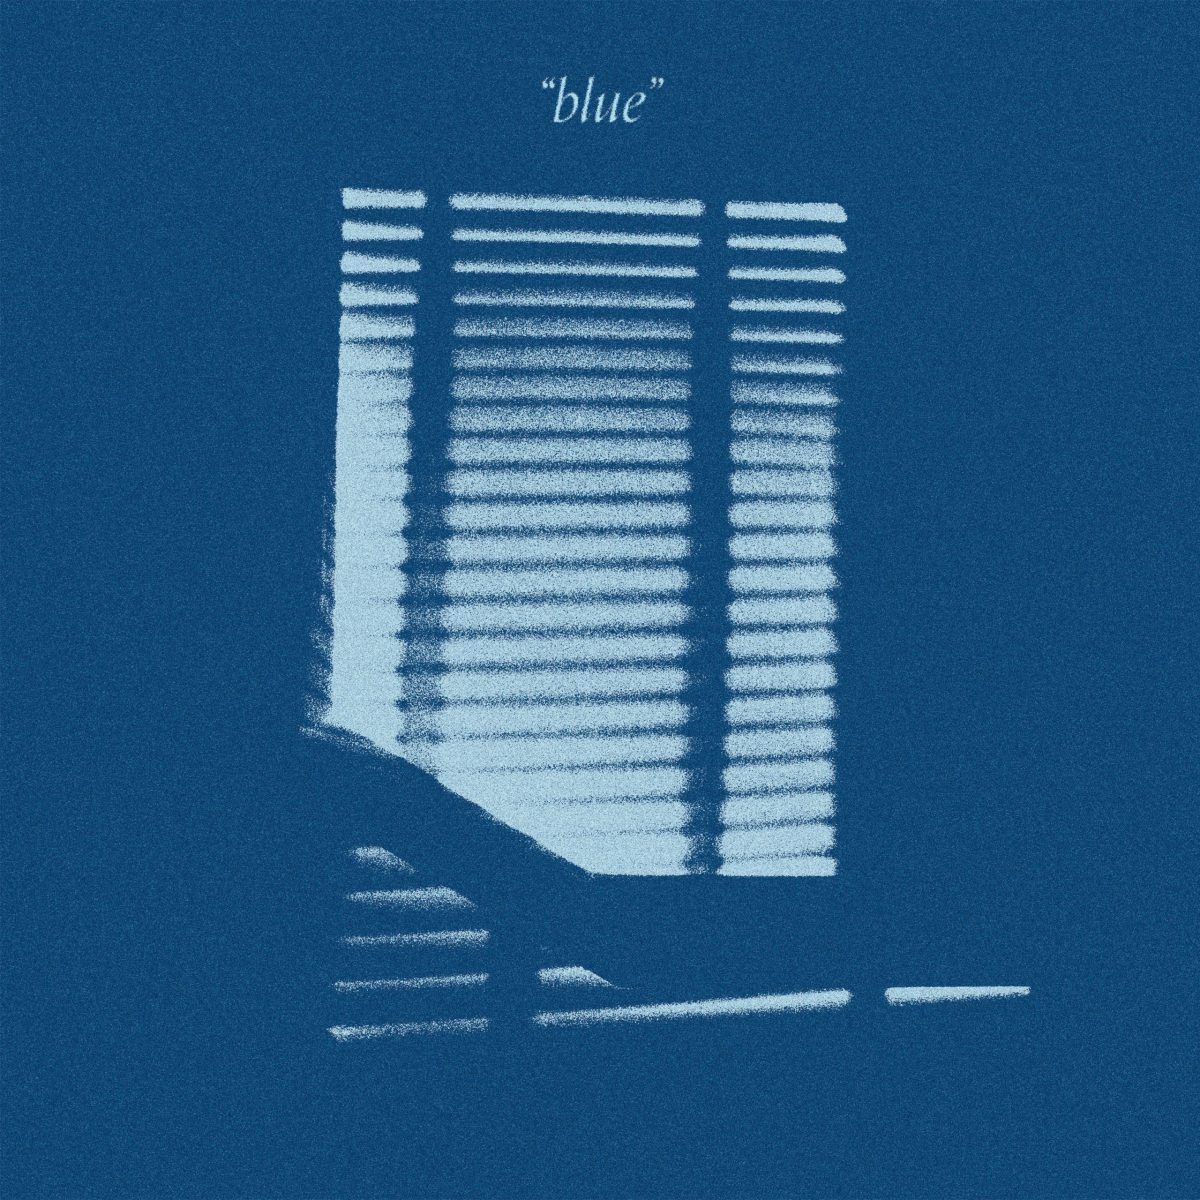 jacob-fortyhands-blue-ep-review